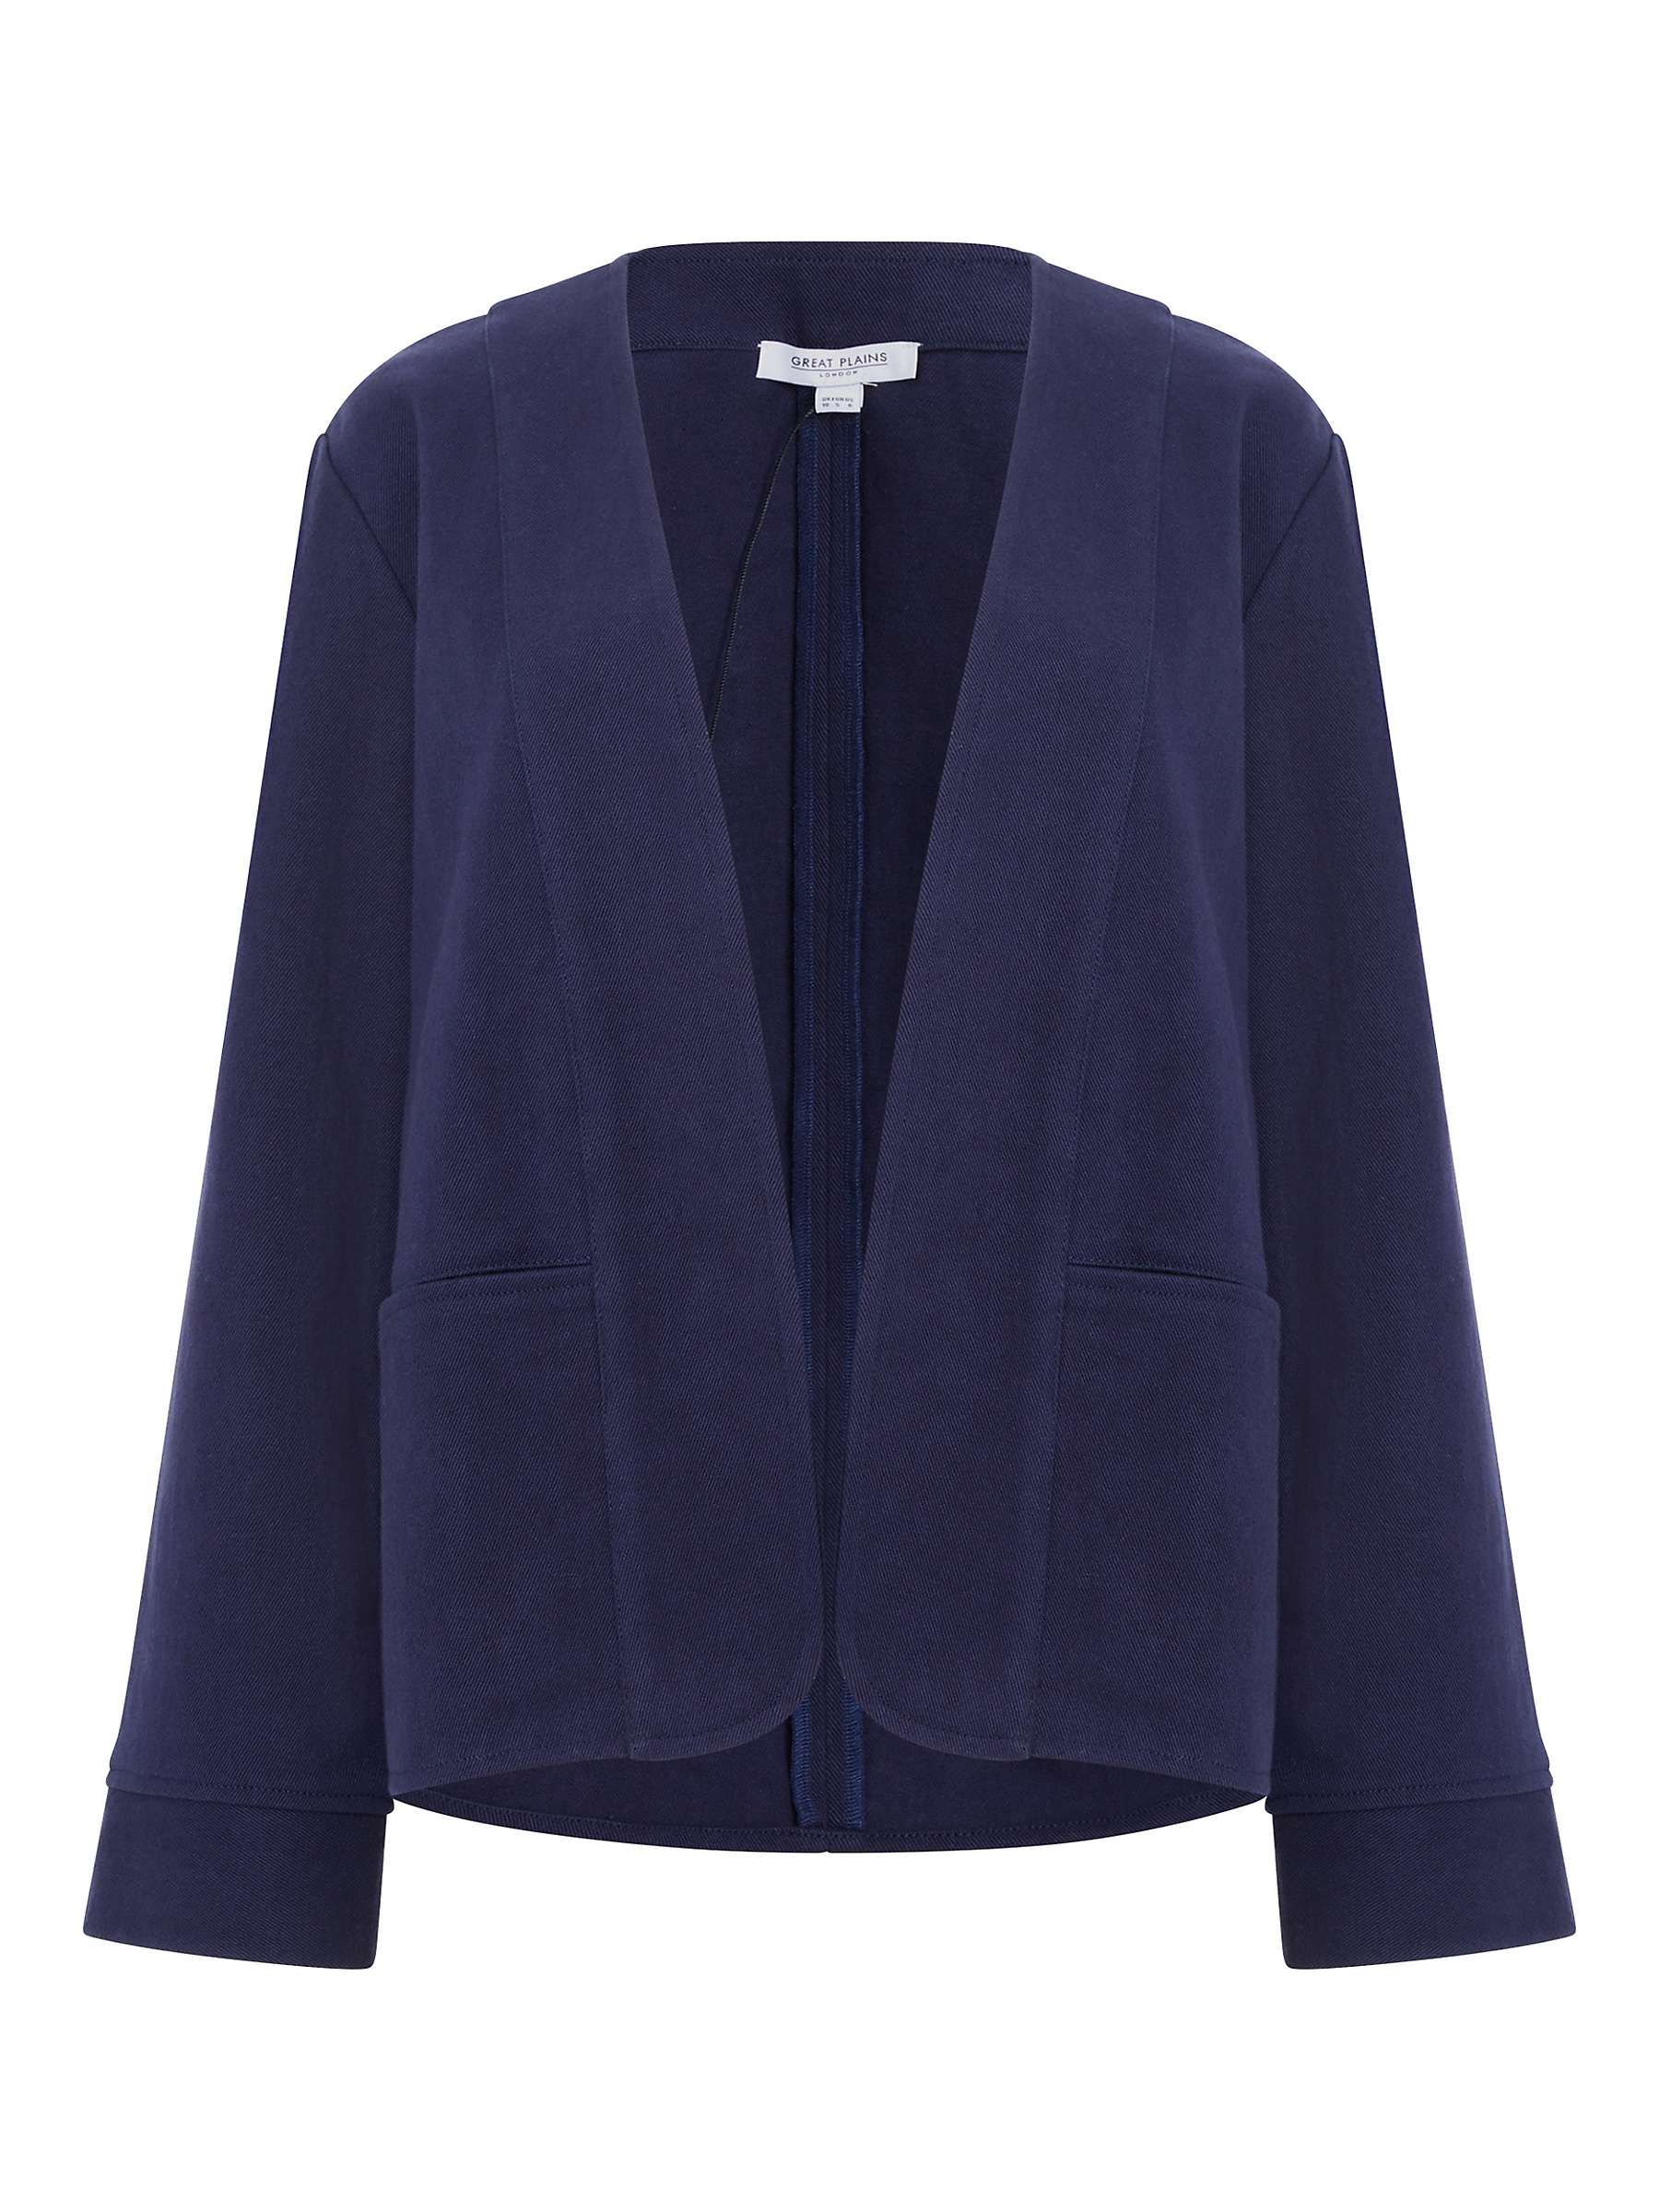 Buy Great Plains Day Cotton Jacket, Summer Navy Online at johnlewis.com